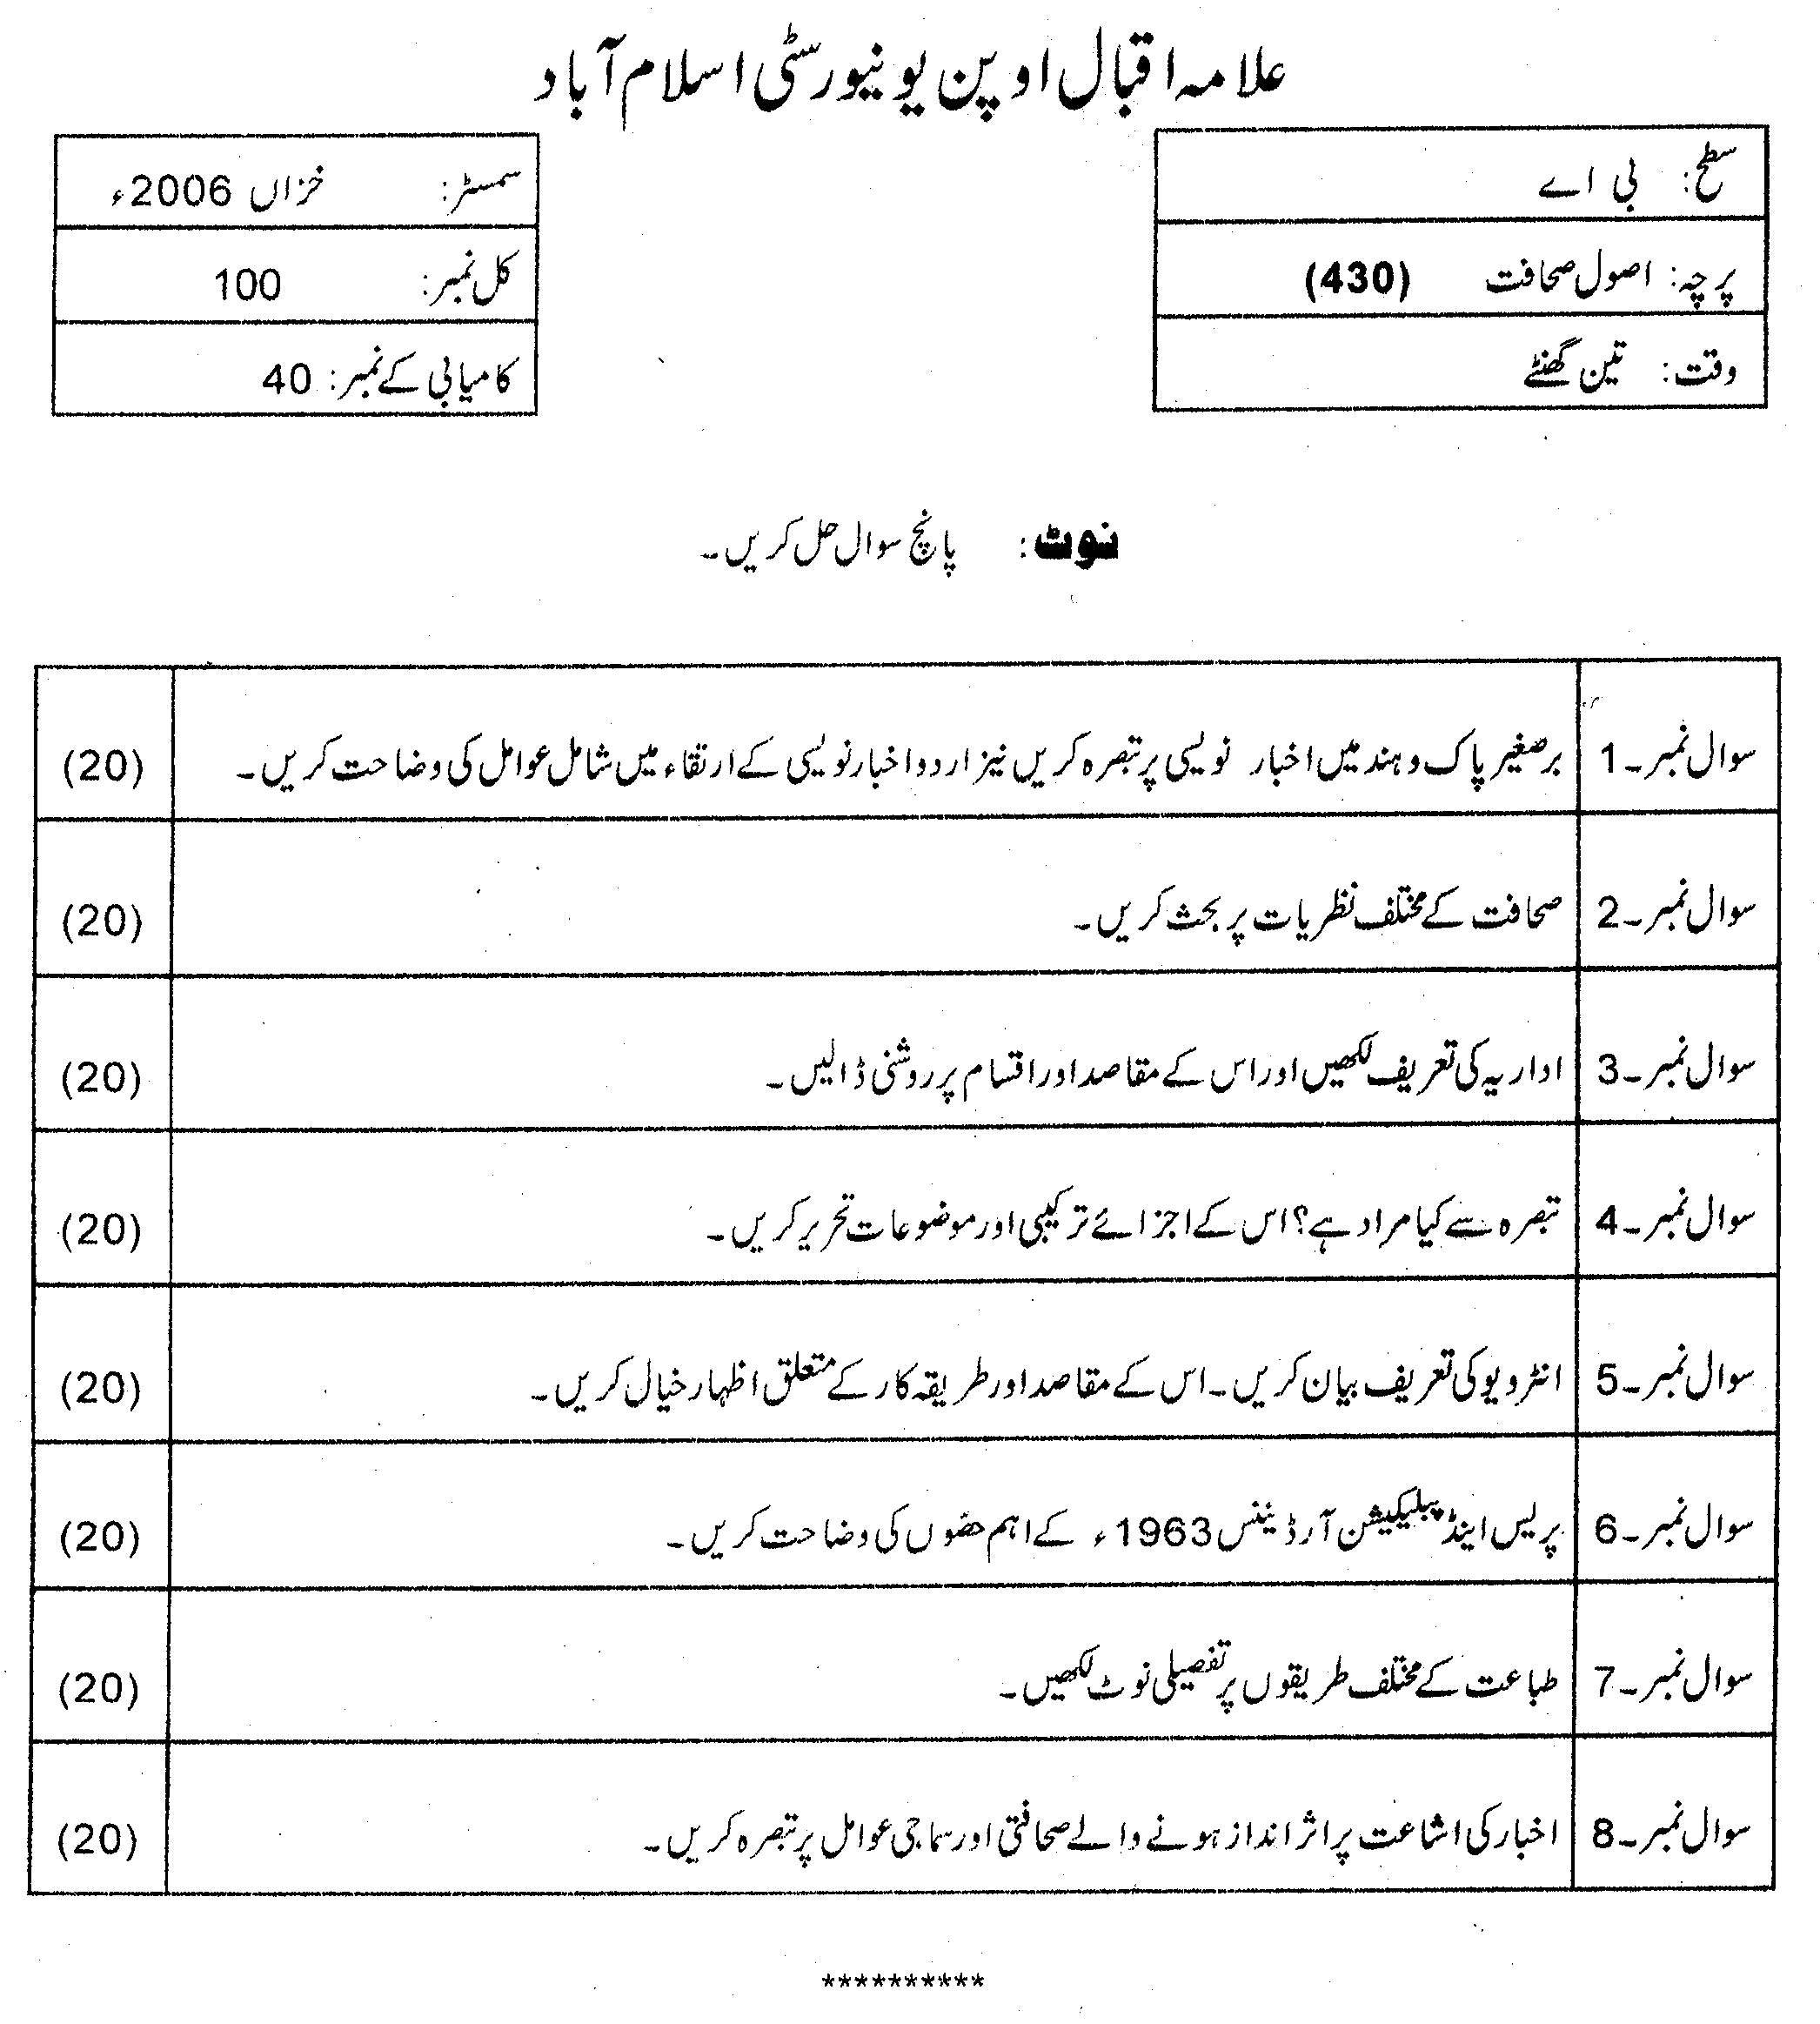 AIOU Past Papers of Ba Course code 430